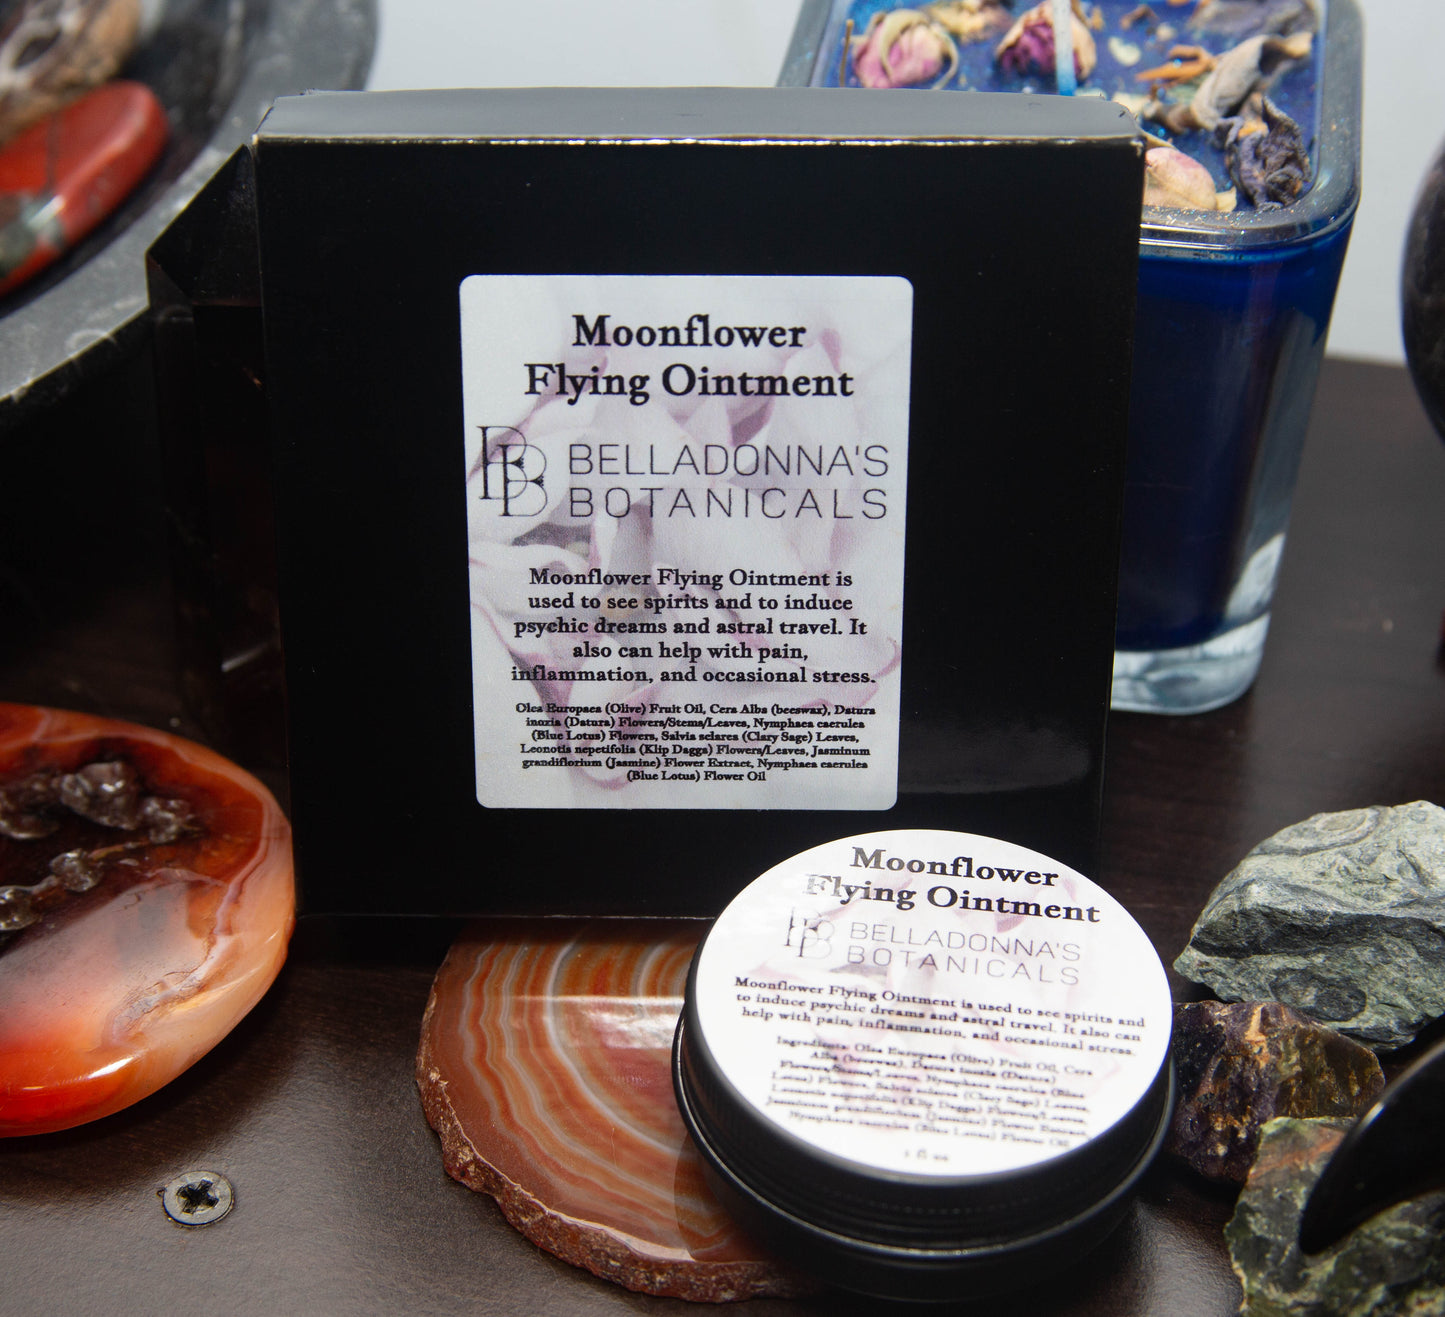 Moonflower Flying Ointment